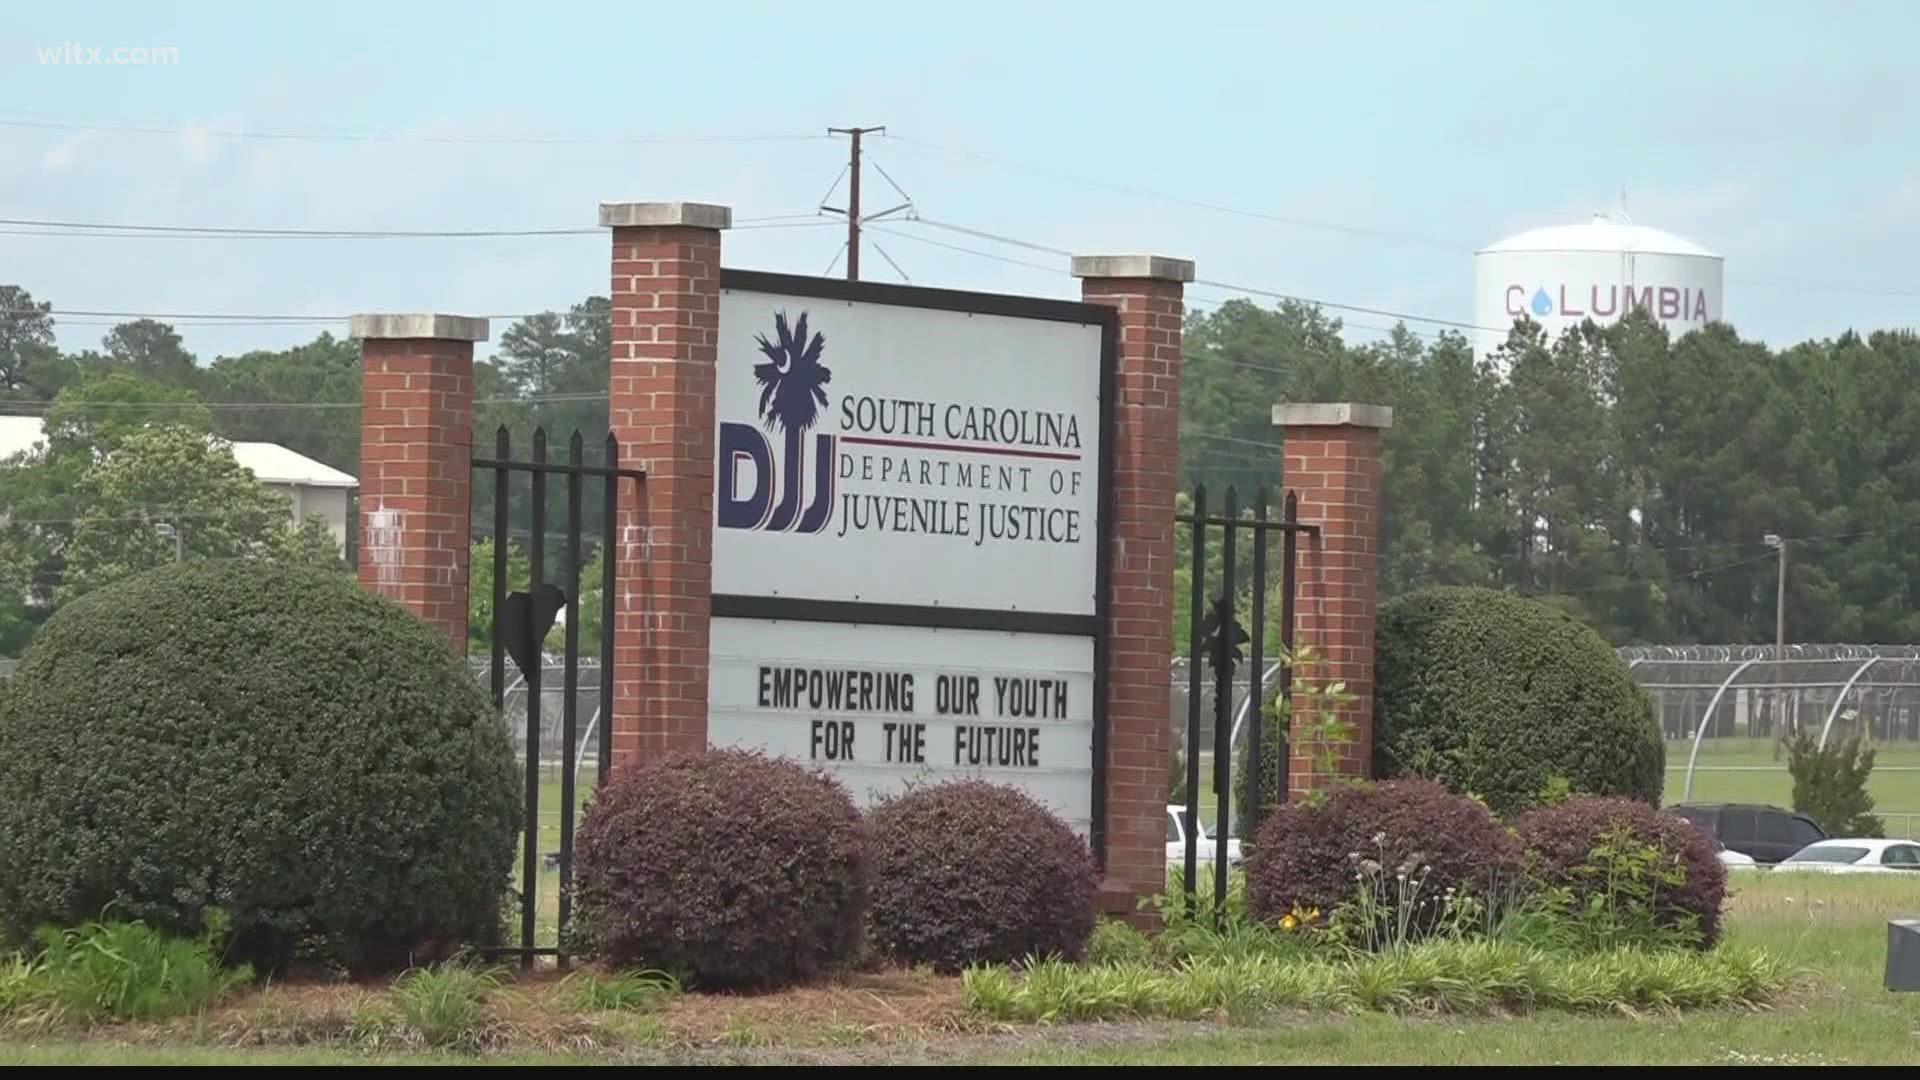 The injury of two juveniles at the South Carolina Department of Juvenile Justice's detention center on Thursday has led to an investigation by state agents.